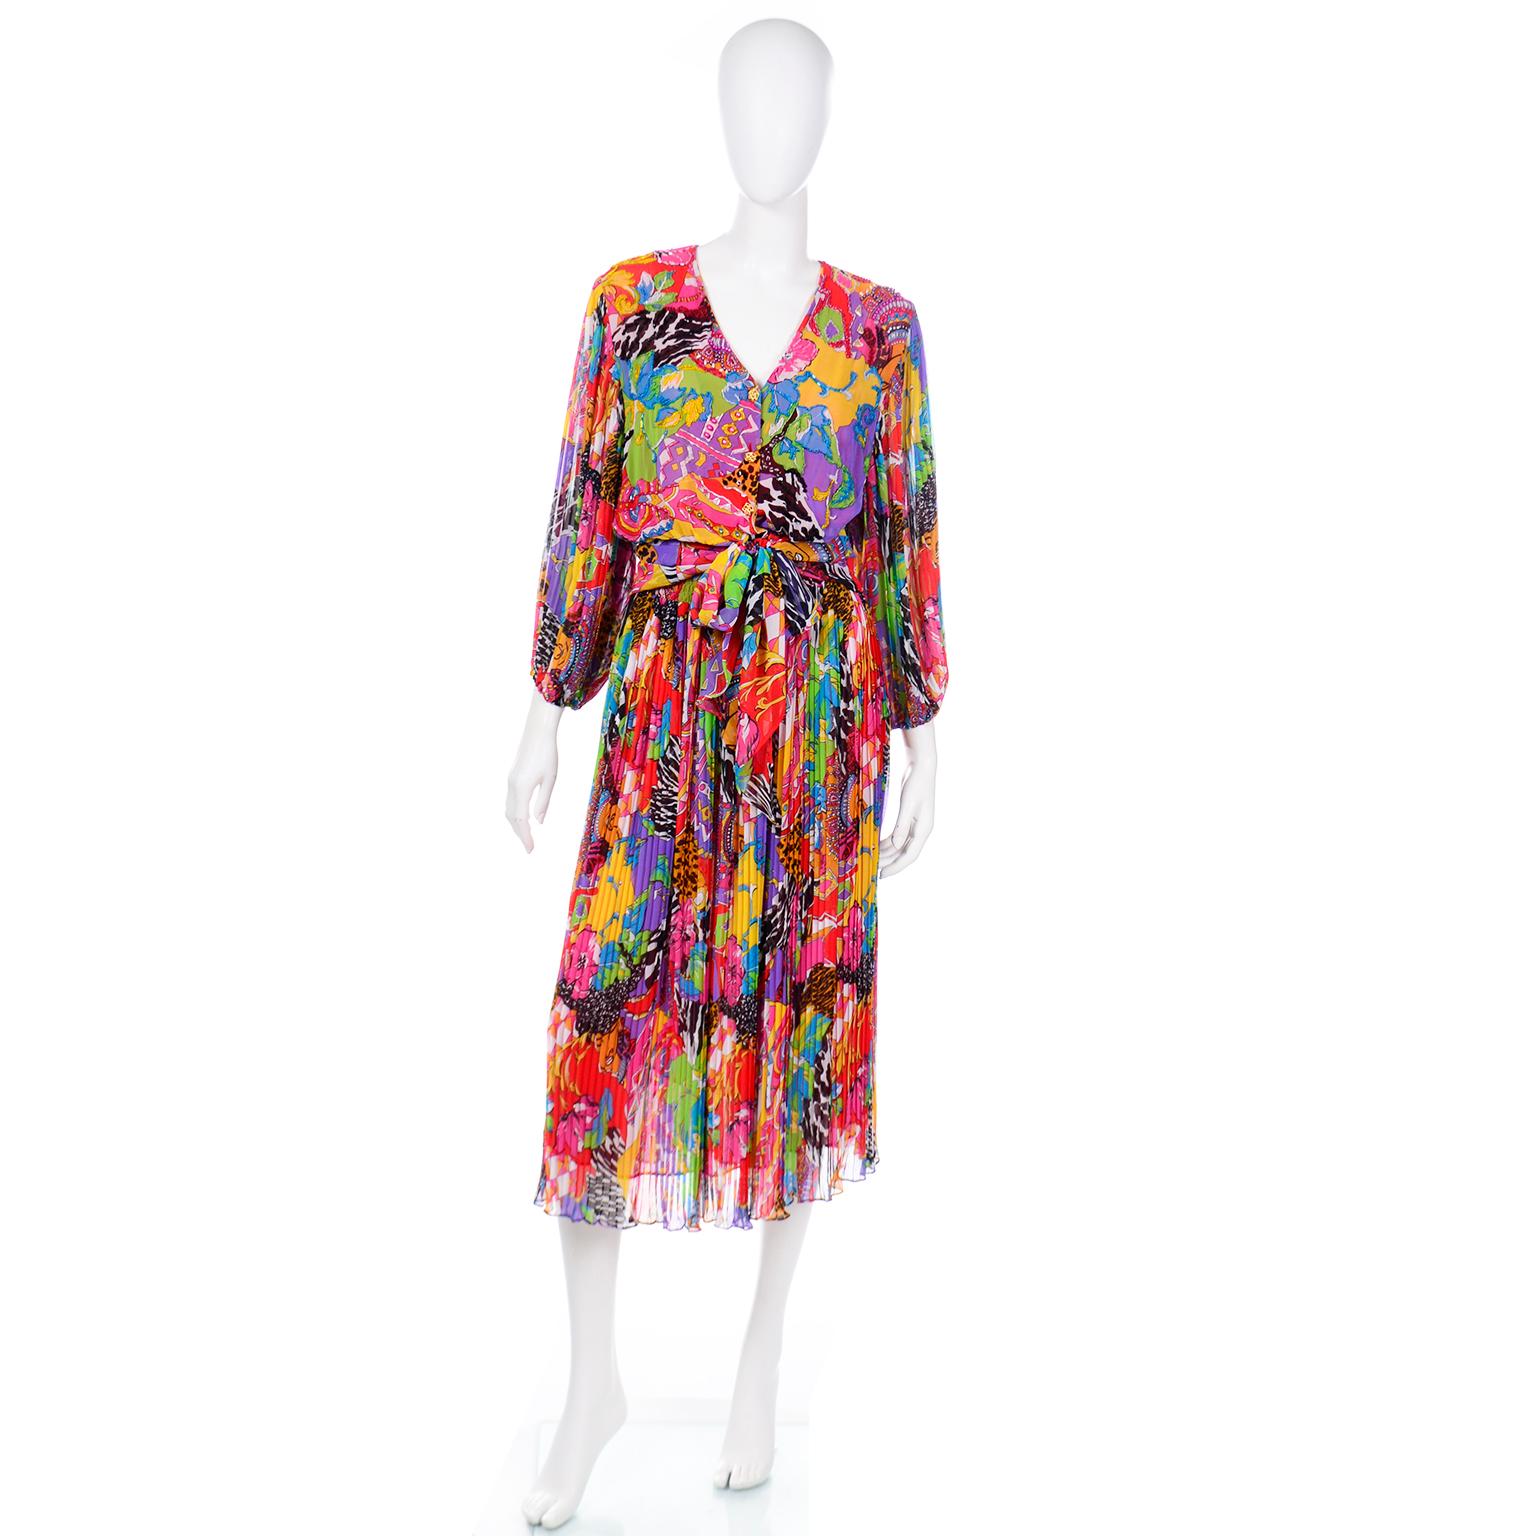 This is a fun vintage Diane Freis 2 piece dress in a bold multi patterned print. The easy to wear top has pleated sleeves with elastic cuffs and a fitted waist. with a wide attached sash tie and ruched lower sides. There are pearls, sequins and